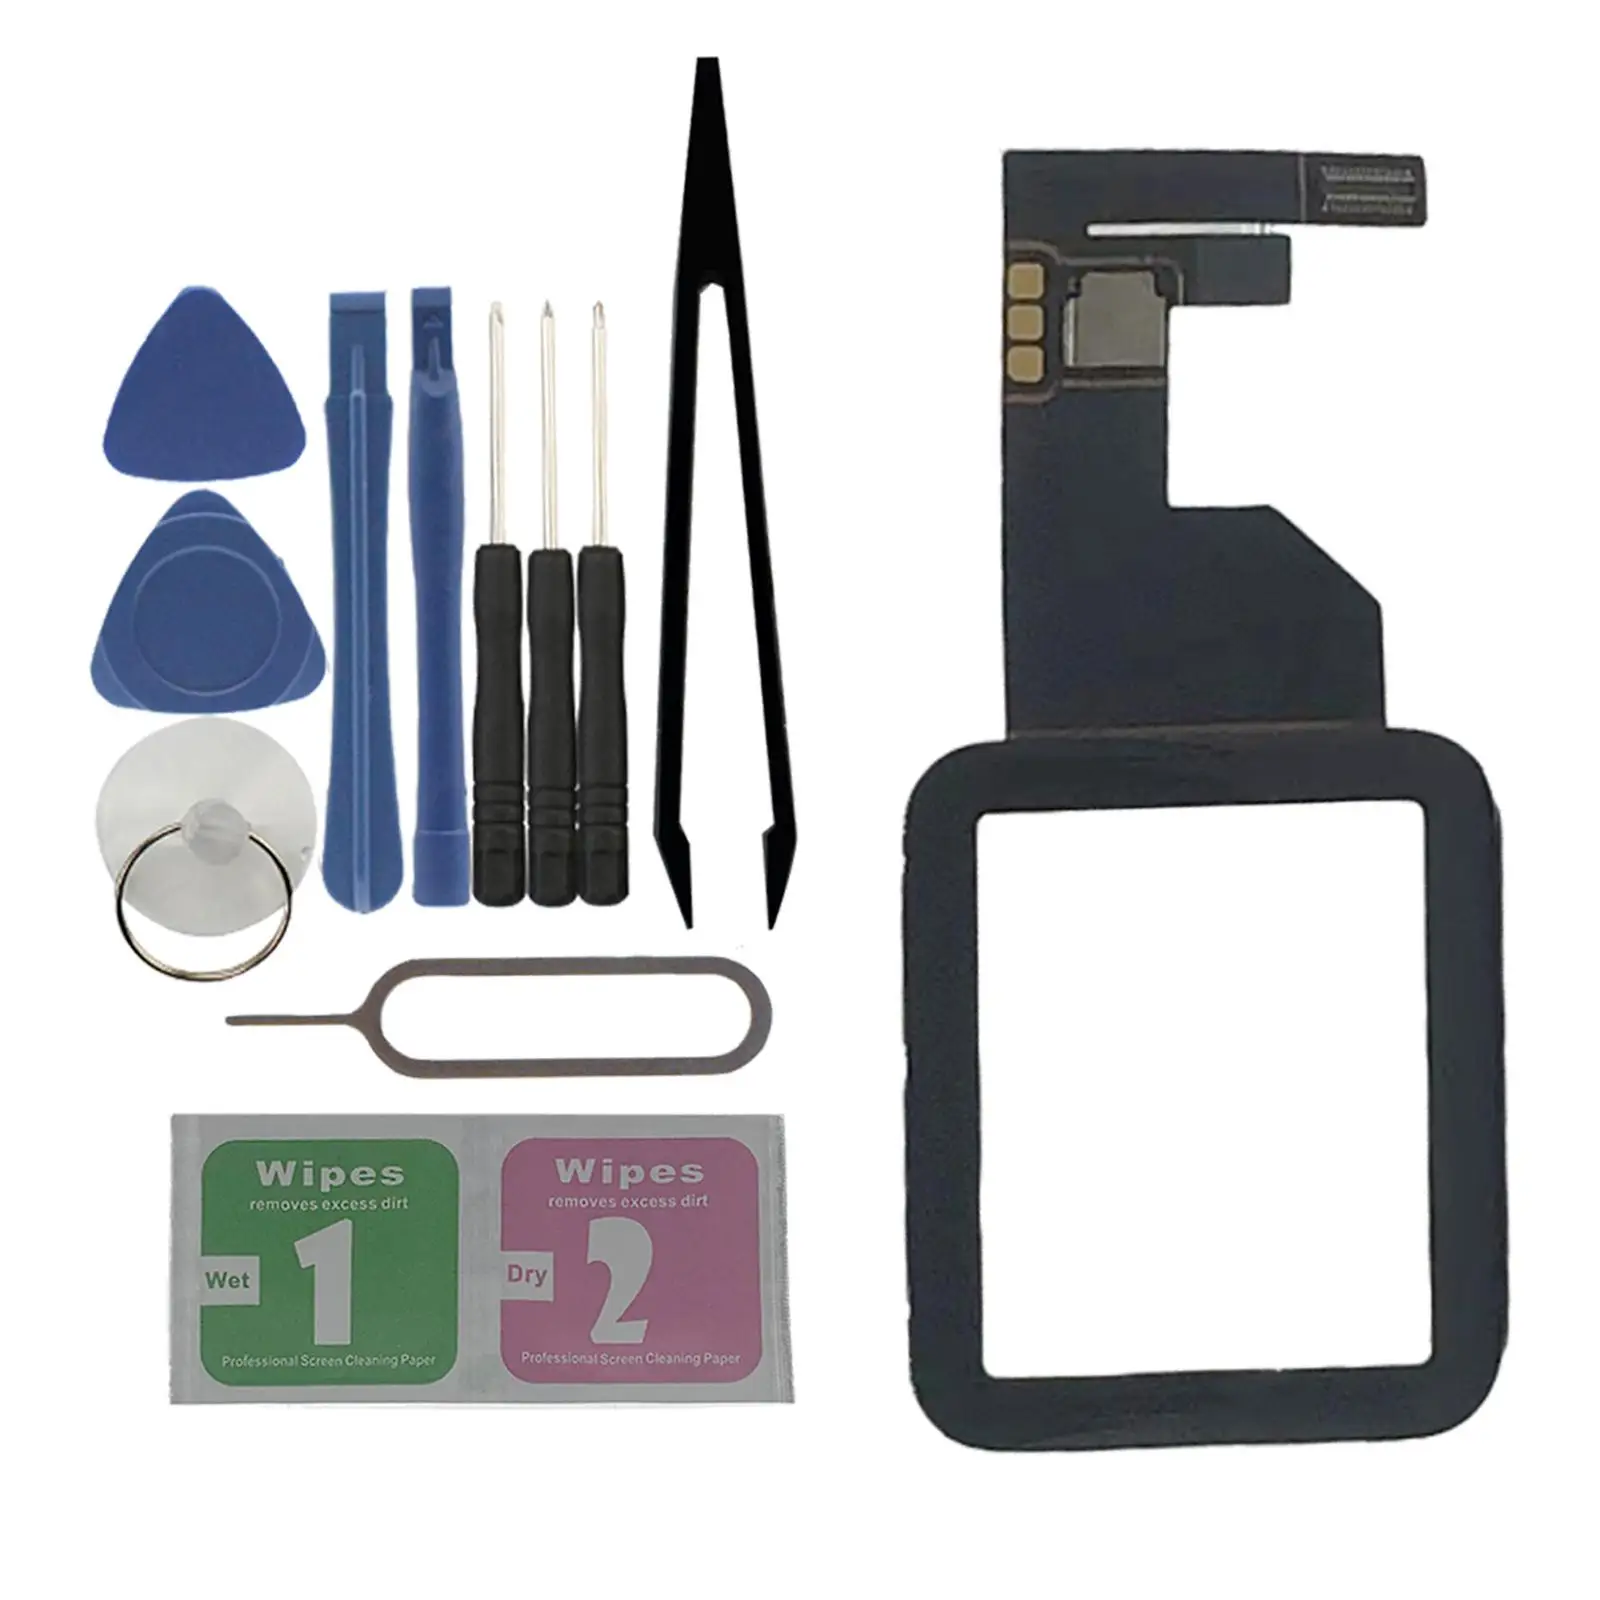 Screen Digitizer Replacement Professional for S1 38mm Smartwatch Accessory